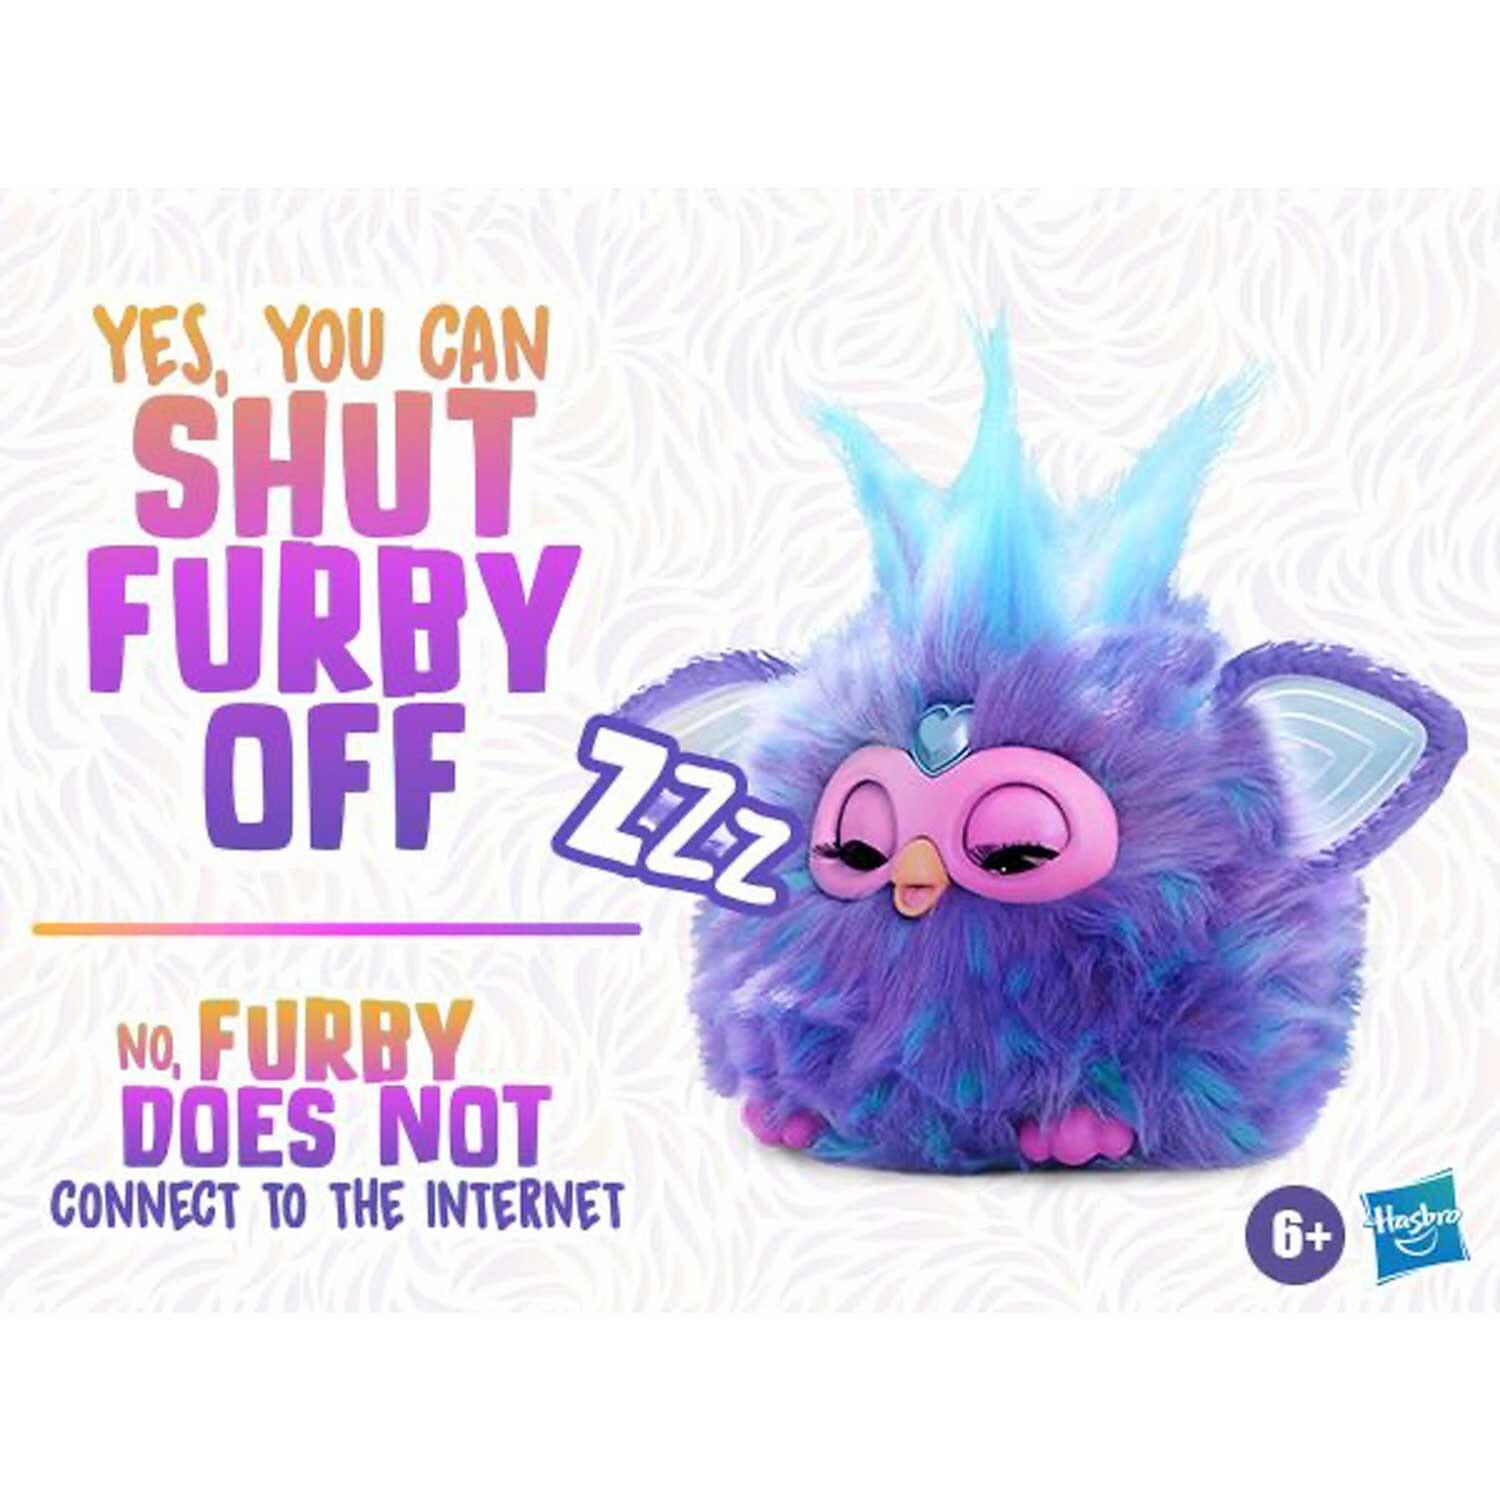 The new Furby's can be turned off